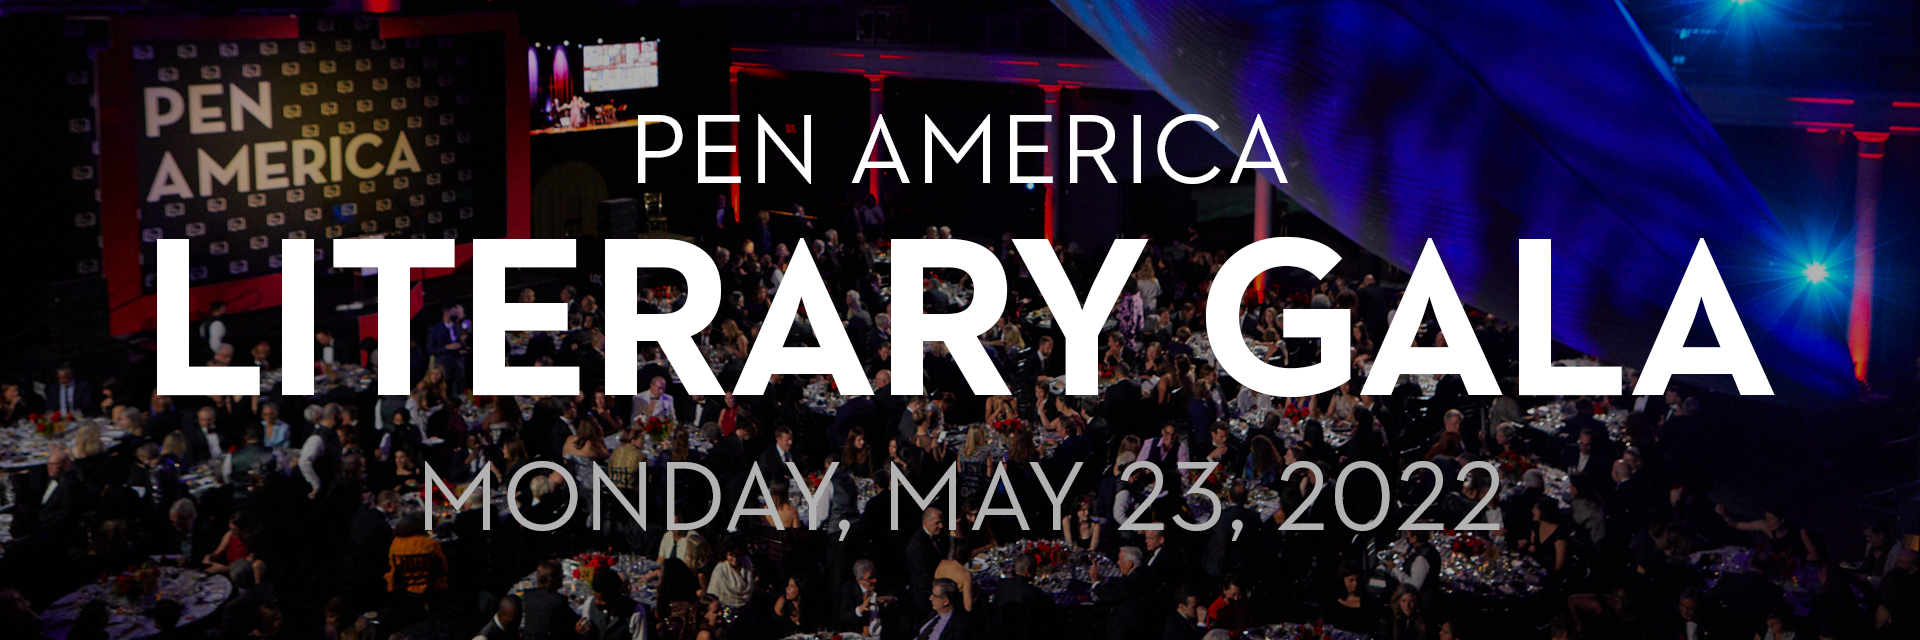 Photo from 2021 PEN America Literary Gala in background; on top: “PEN America Literary Gala. Monday, May 23, 2022”